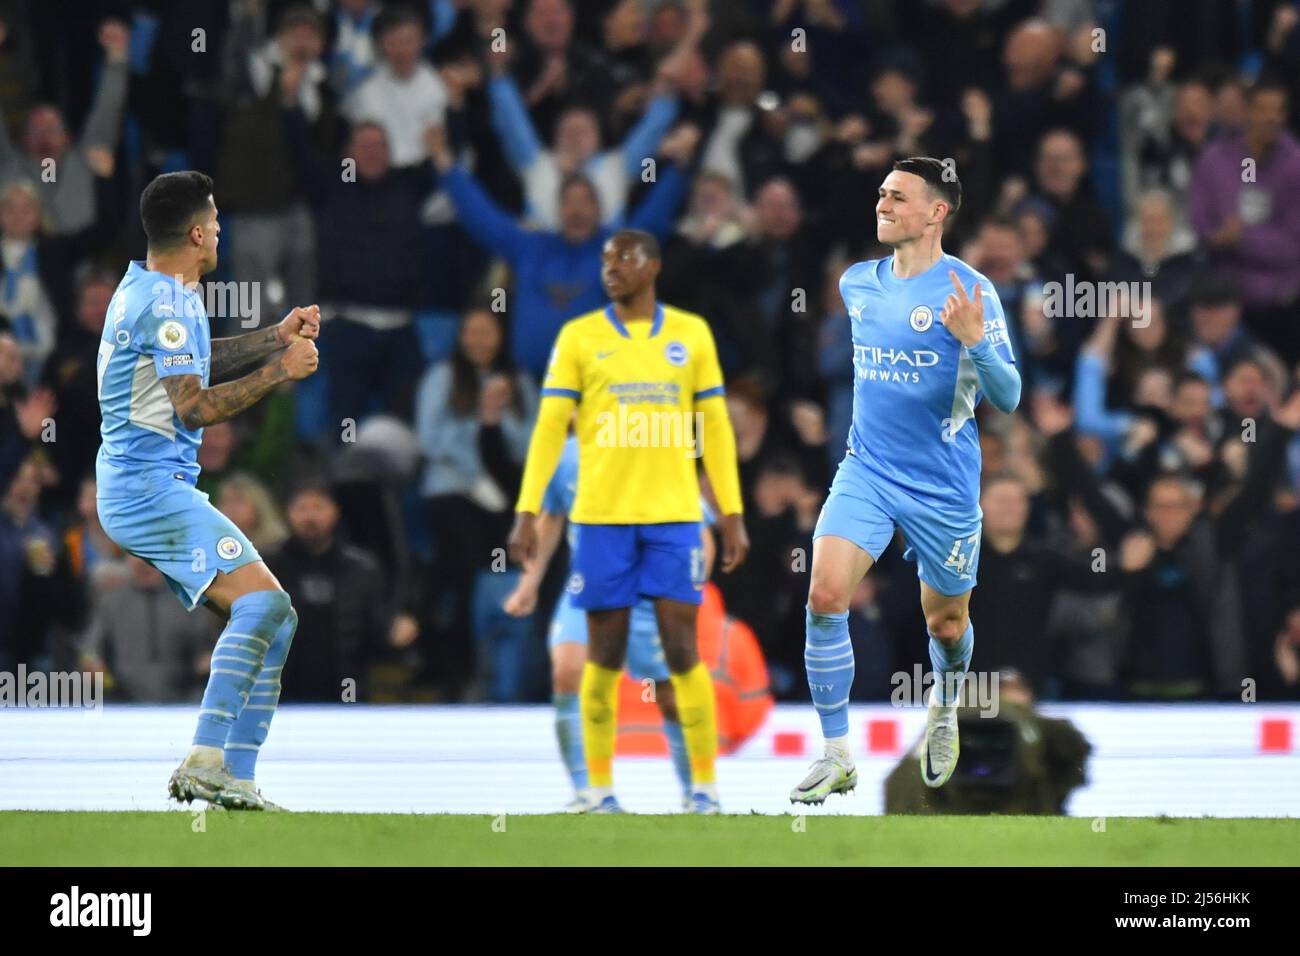 Manchester, UK, 20 April 2022,  Manchester City's Phil Foden celebrates scoring his side's second goal of the game. Picture date: Thursday April 21, 2022. Photo credit should read:   Anthony Devlin/Alamy Live News/Alamy Live News Stock Photo